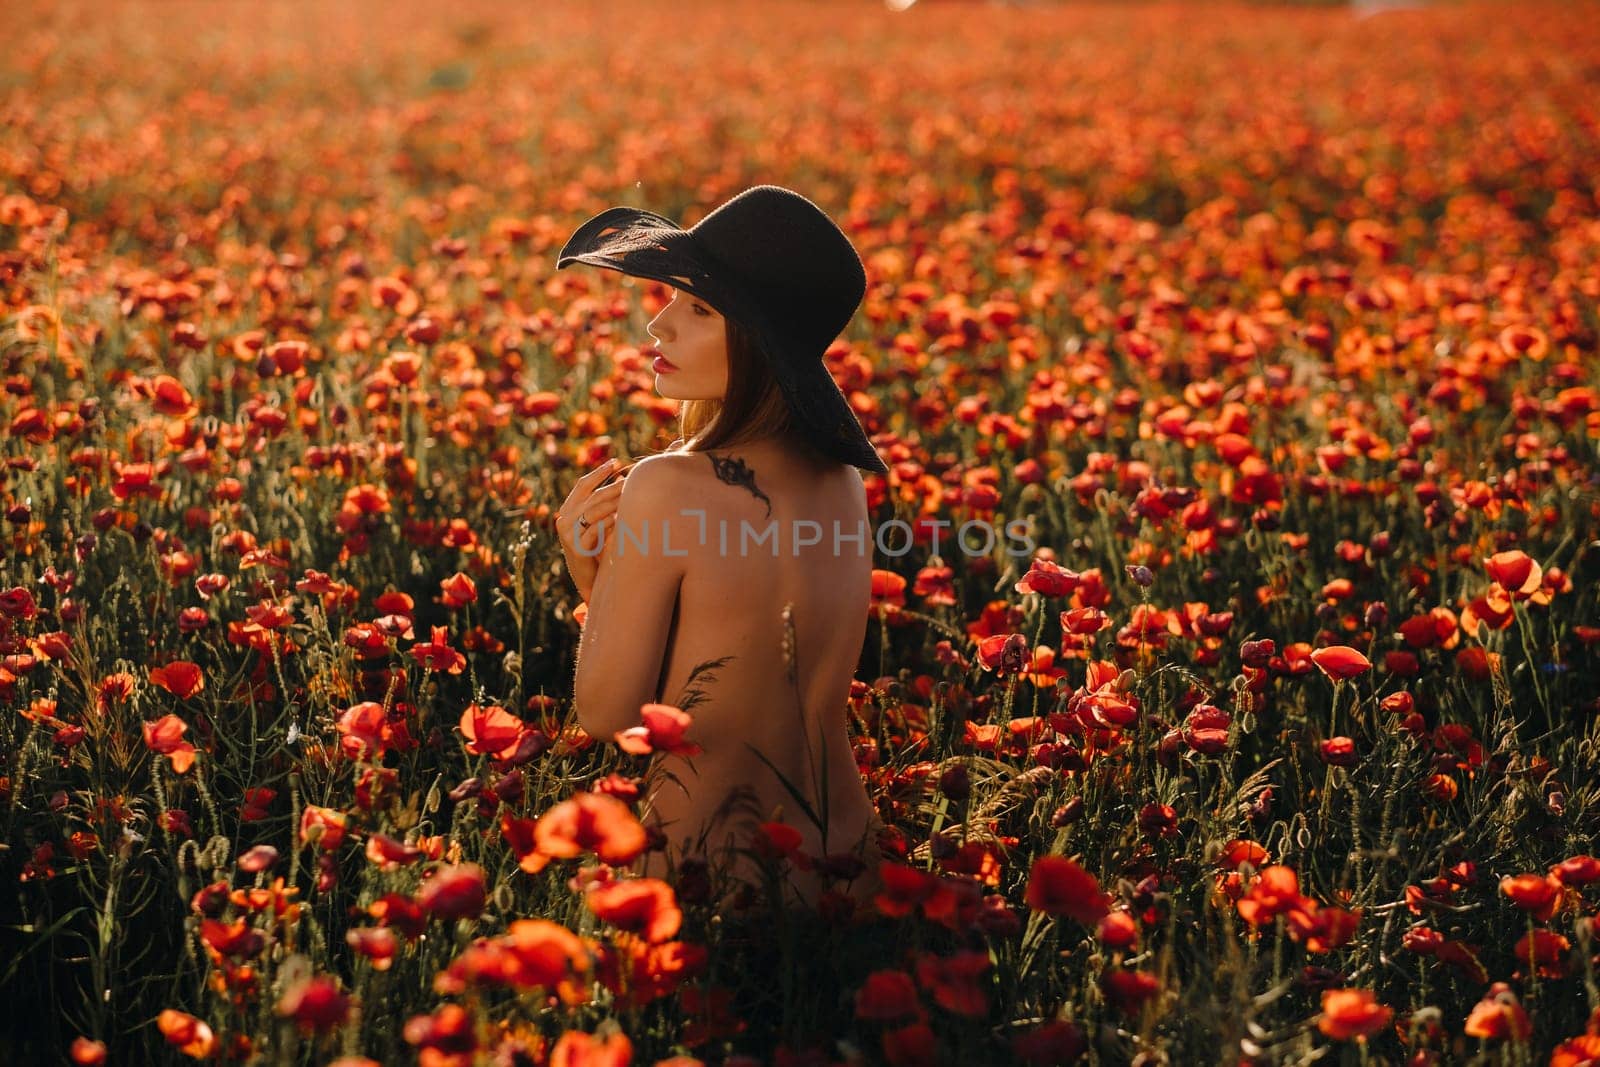 naked girl from behind in a black hat in a poppy field at sunset by Lobachad